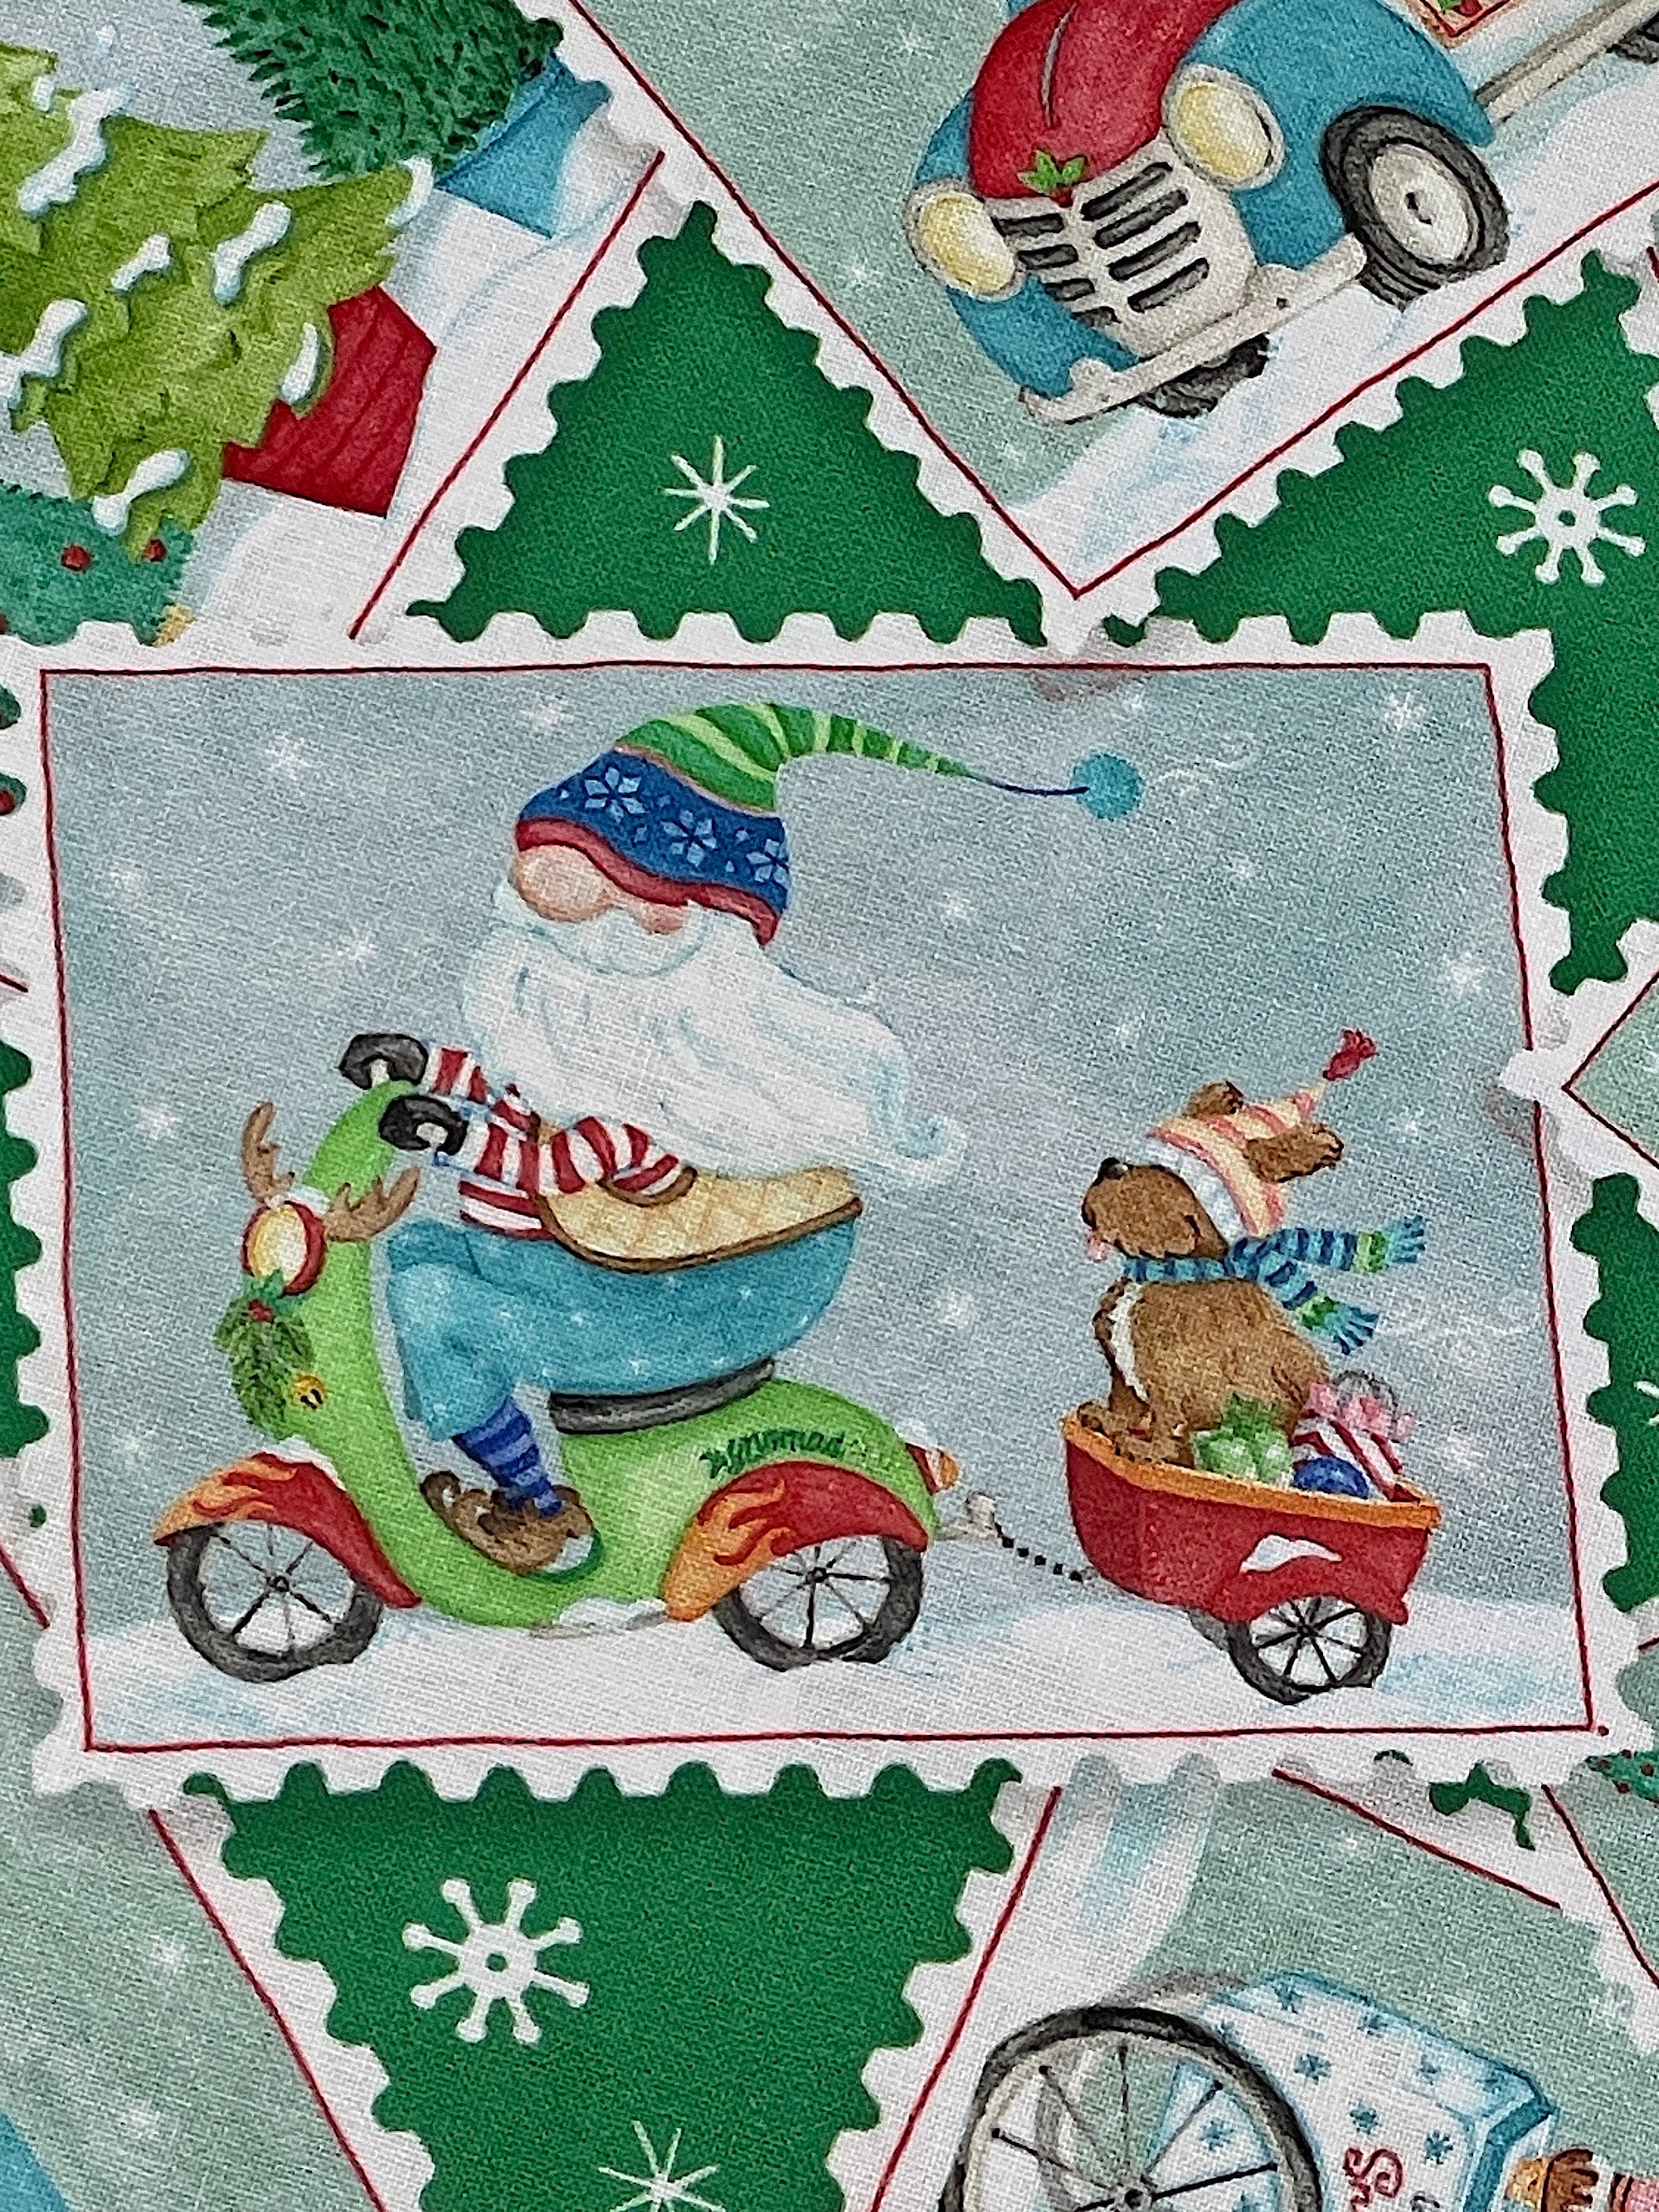 Close up of a postcard with Santa gnome riding a scooter pulling a wagon that has a dog and presents in it.